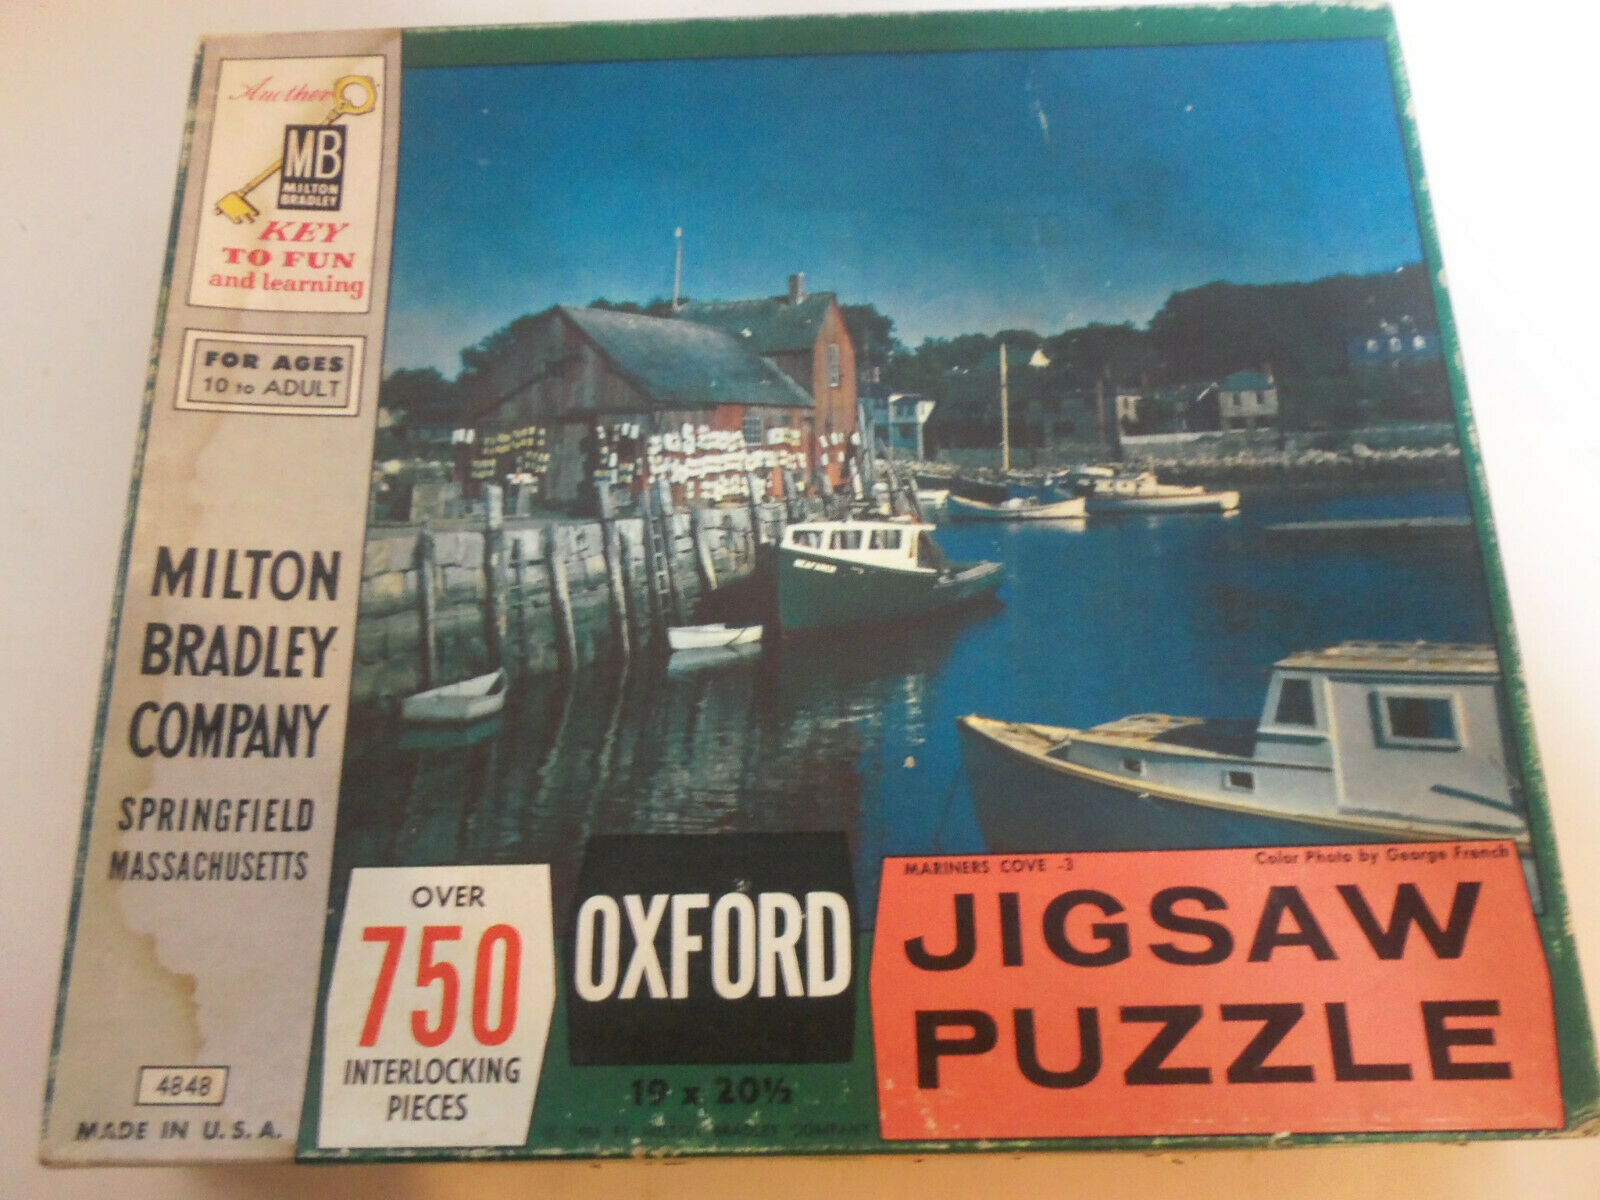 1958 MB Milton Bradley OXFORD MARINERS COVE 4848 Jigsaw Puzzle COMPLETE 750pc - $34.60